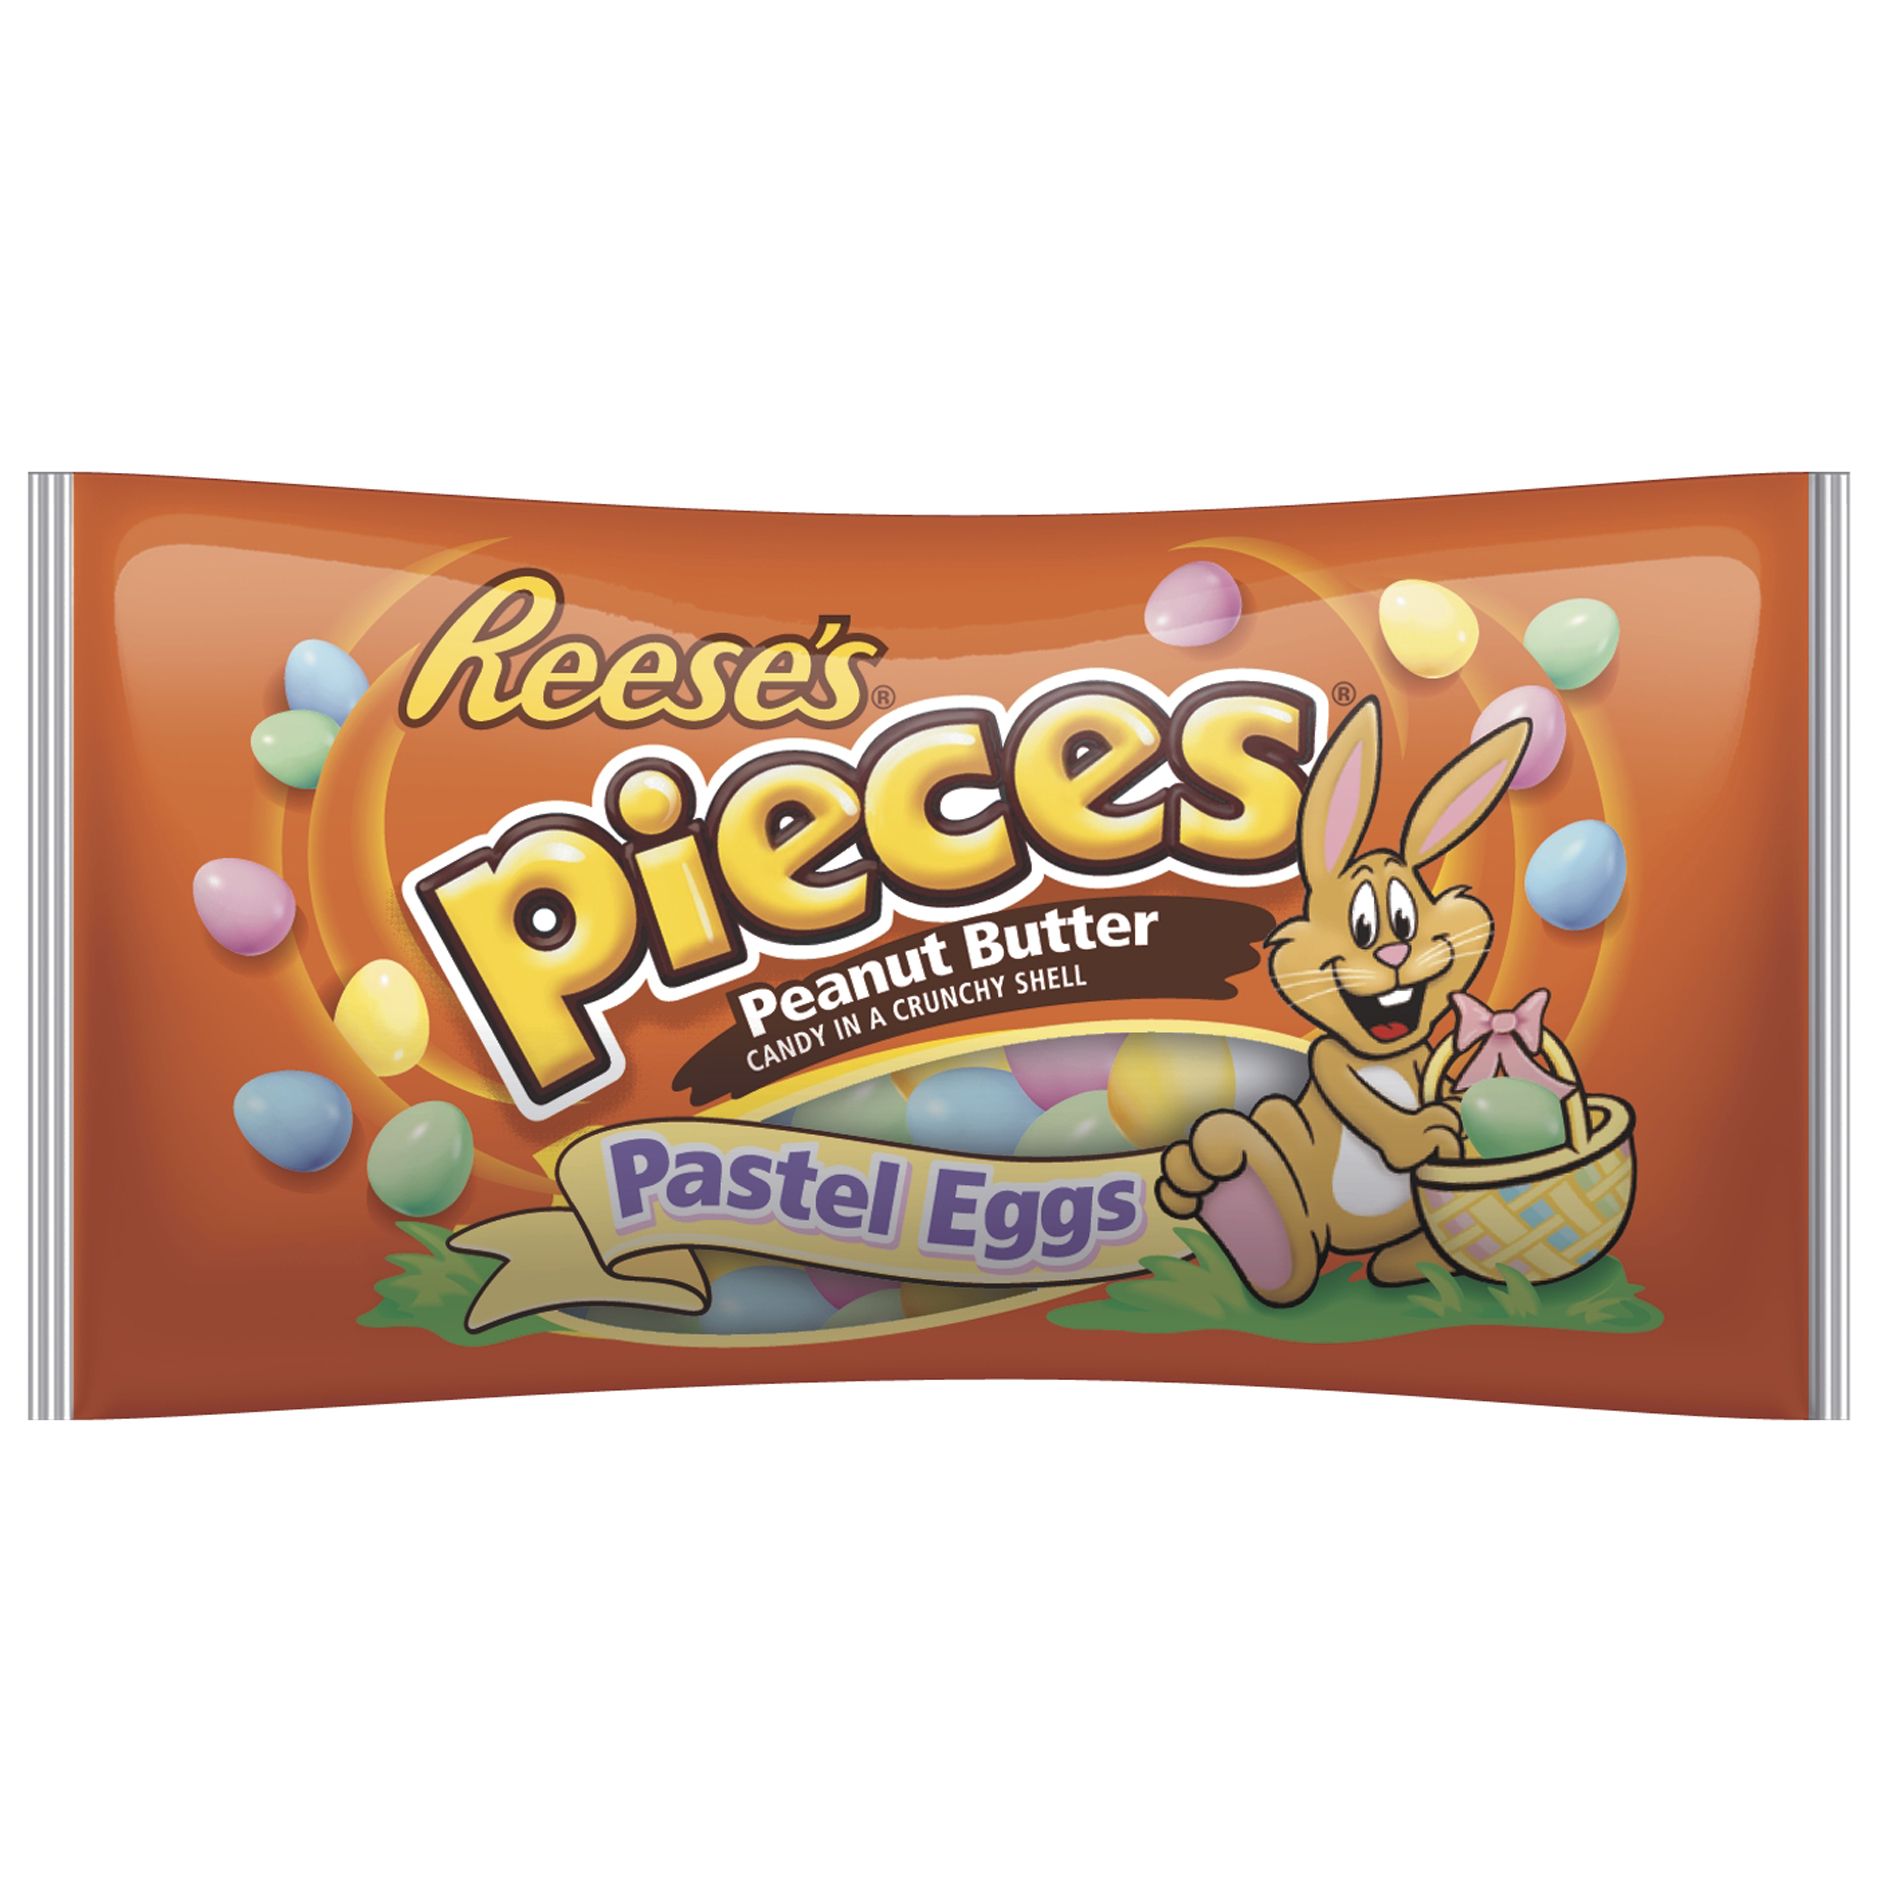 Reese's Pieces Peanut Butter Pastel Eggs Candy, 12 oz. - Food & Grocery